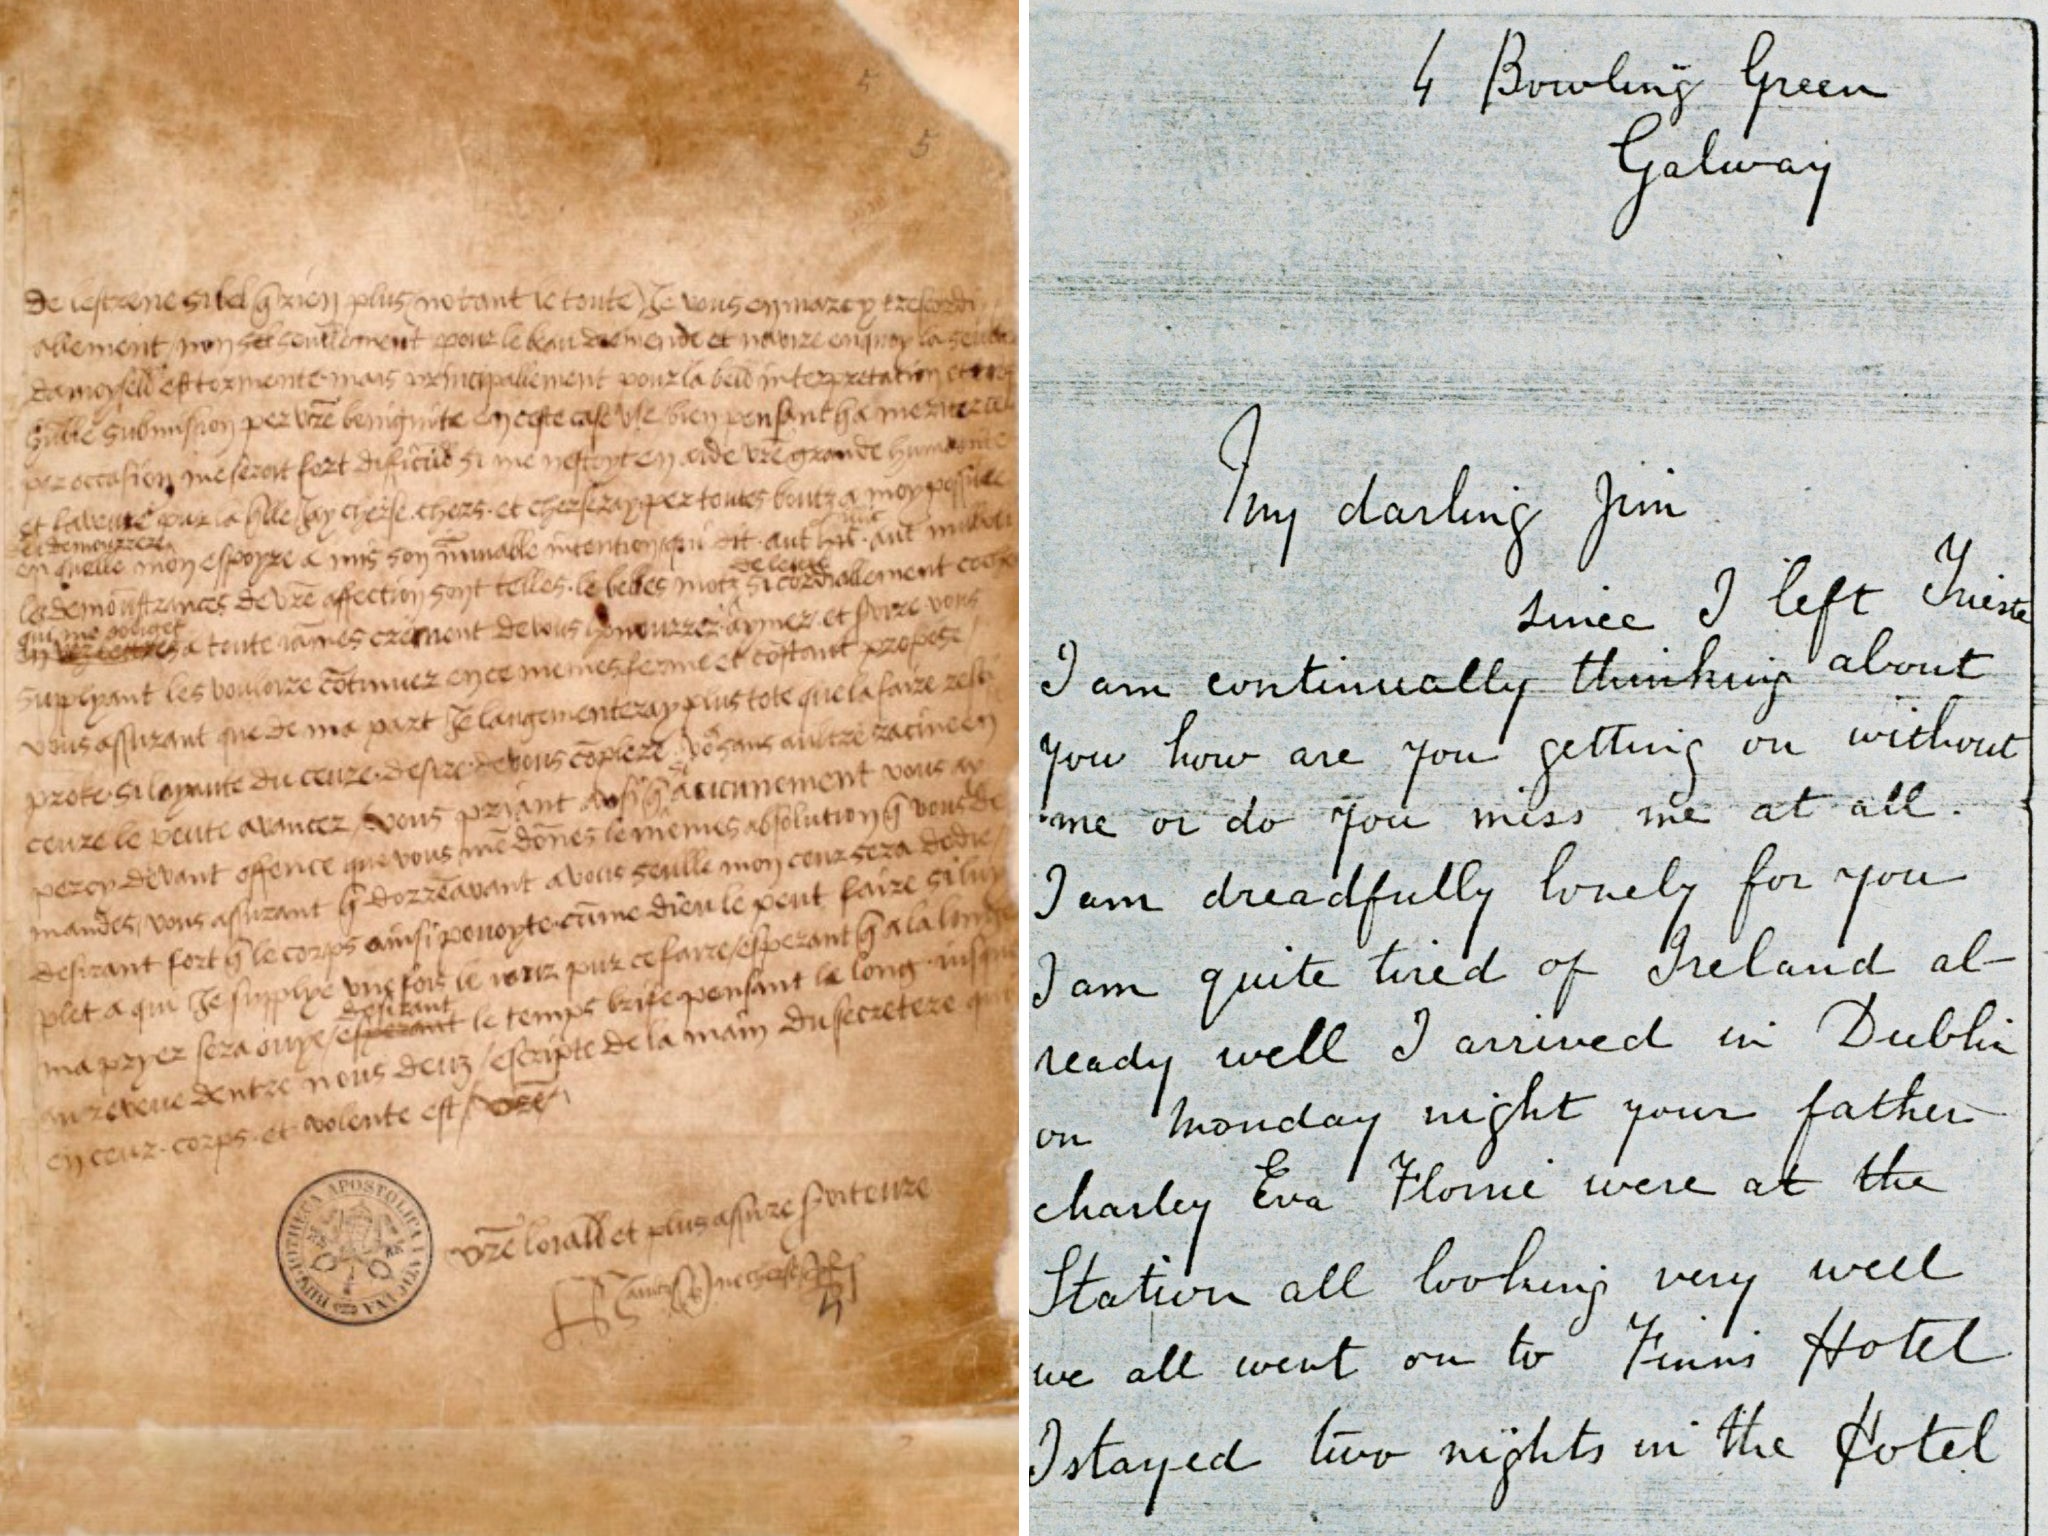 Who owns the copyright of a love letter? The writer or the recipient?